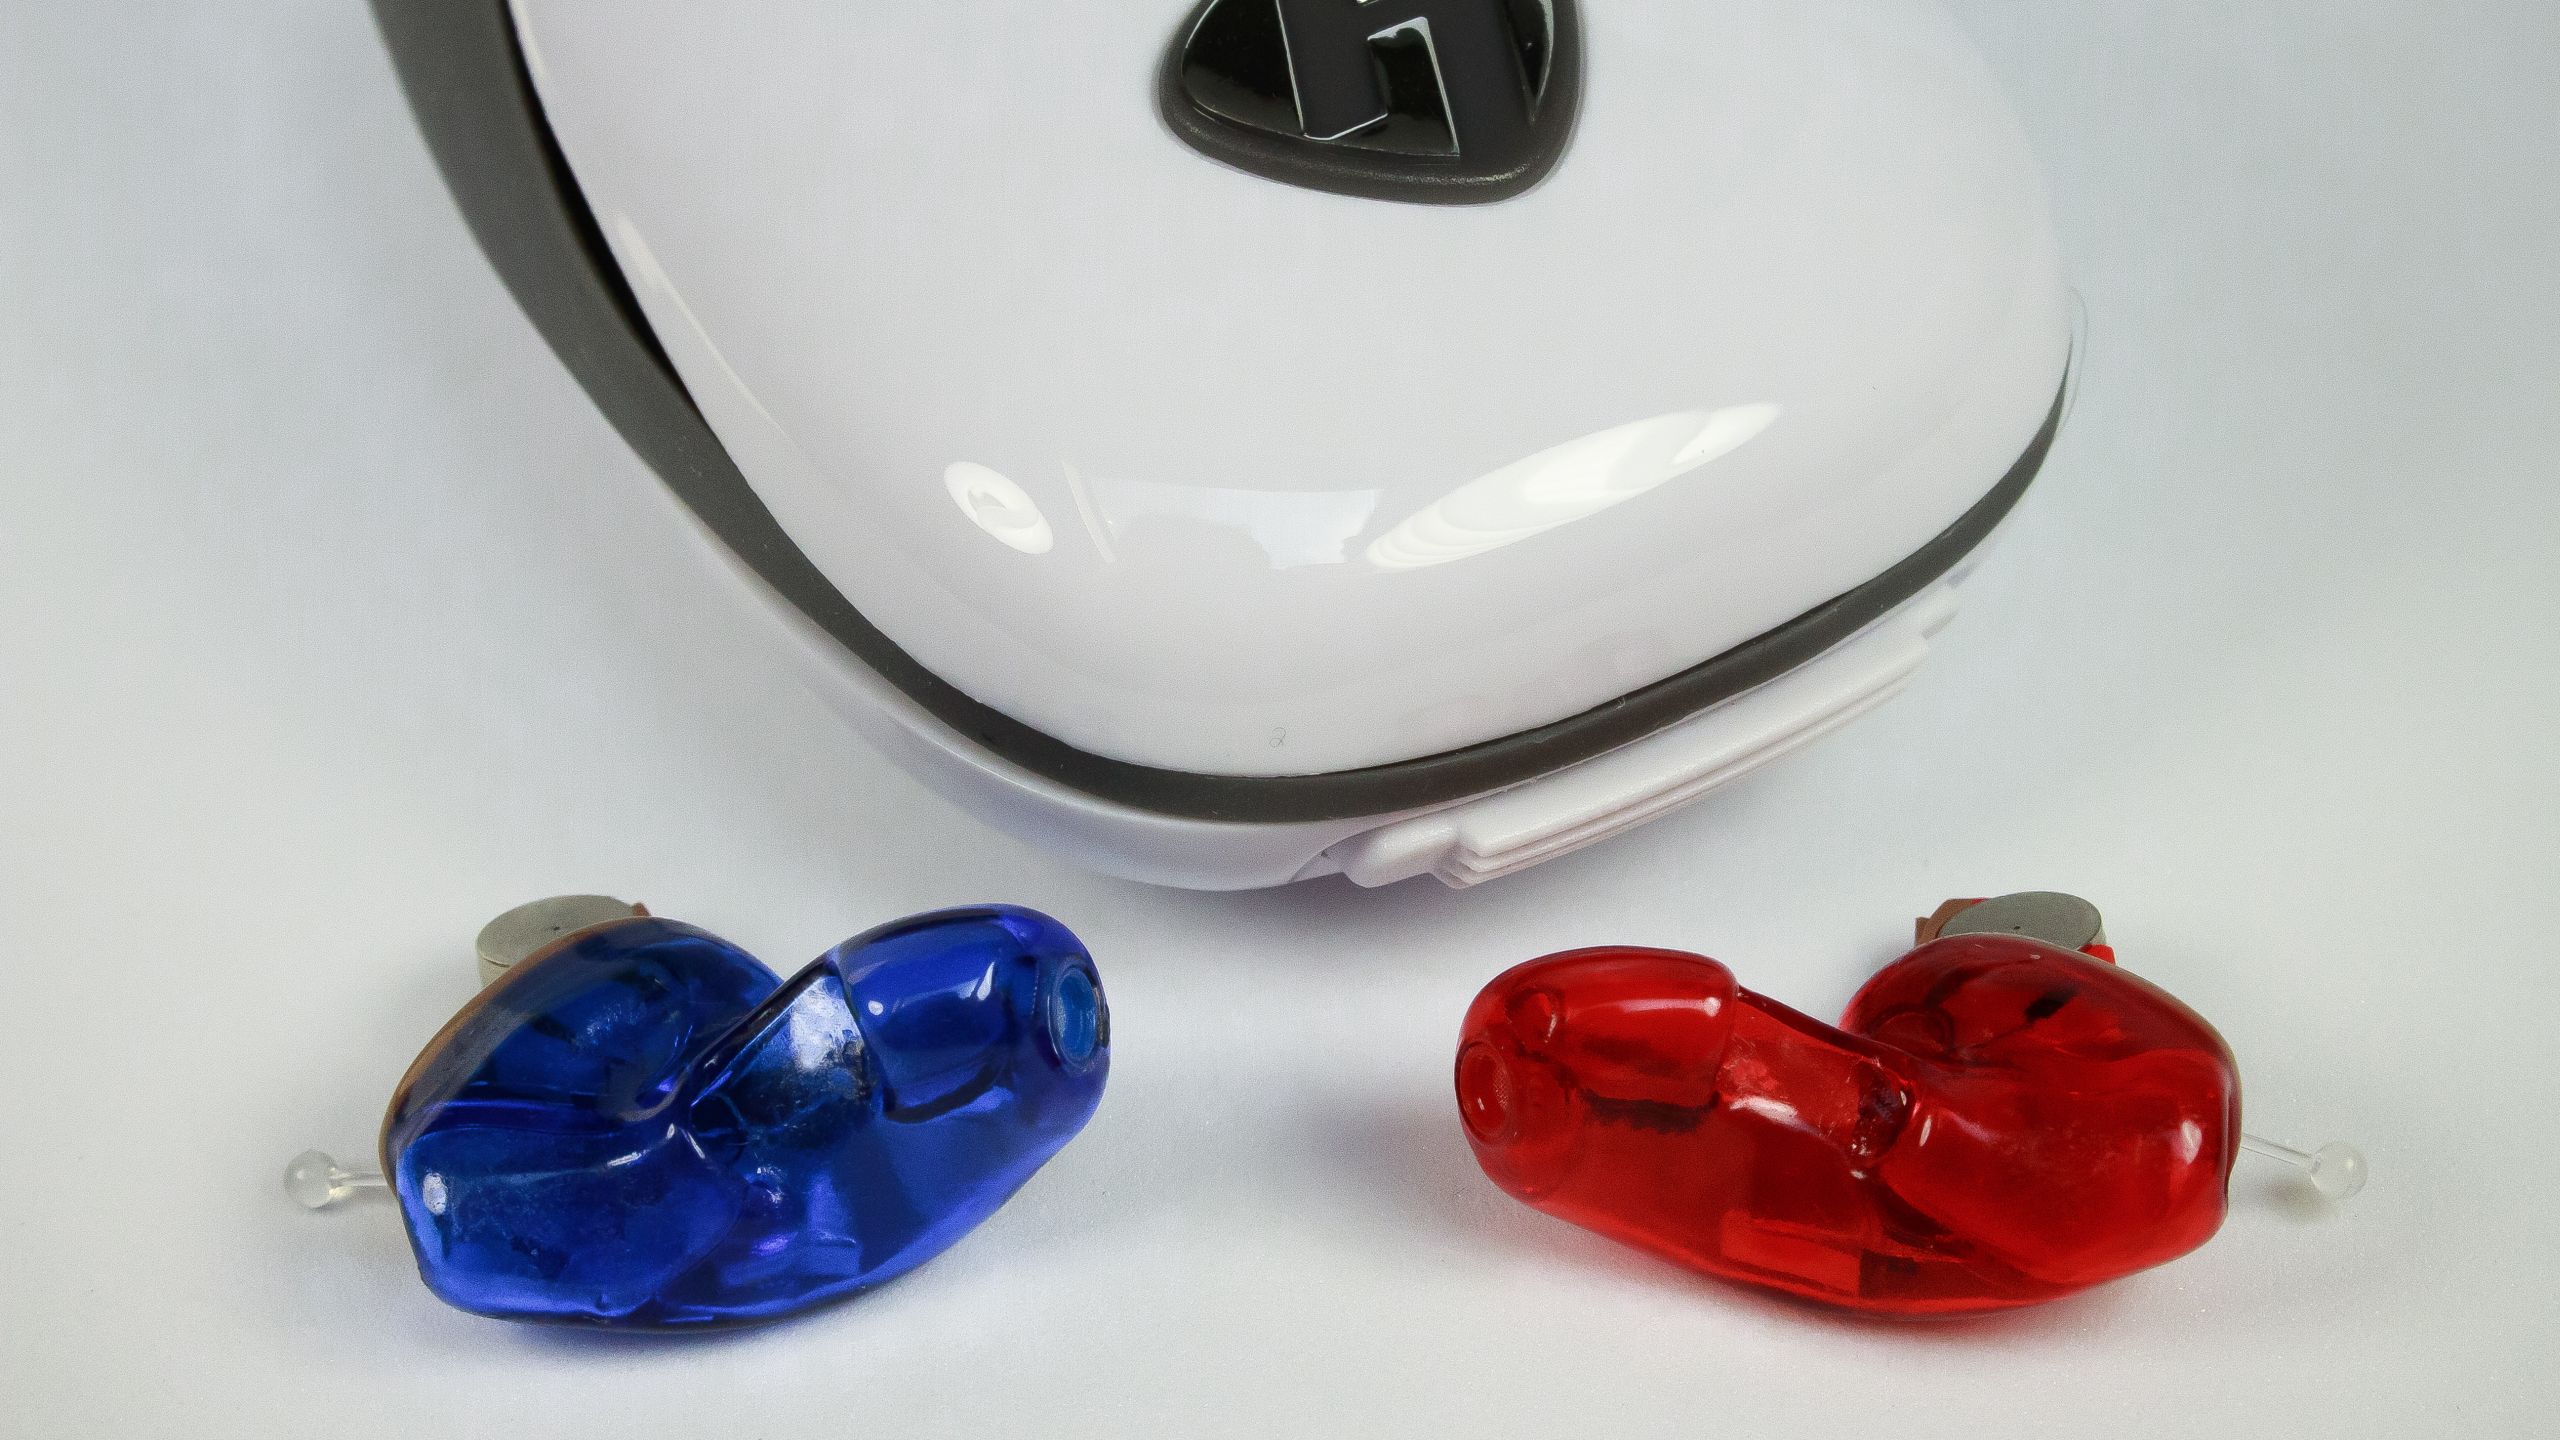 A pair of ITC hearing aids with exposed battery, laying next to a white case.